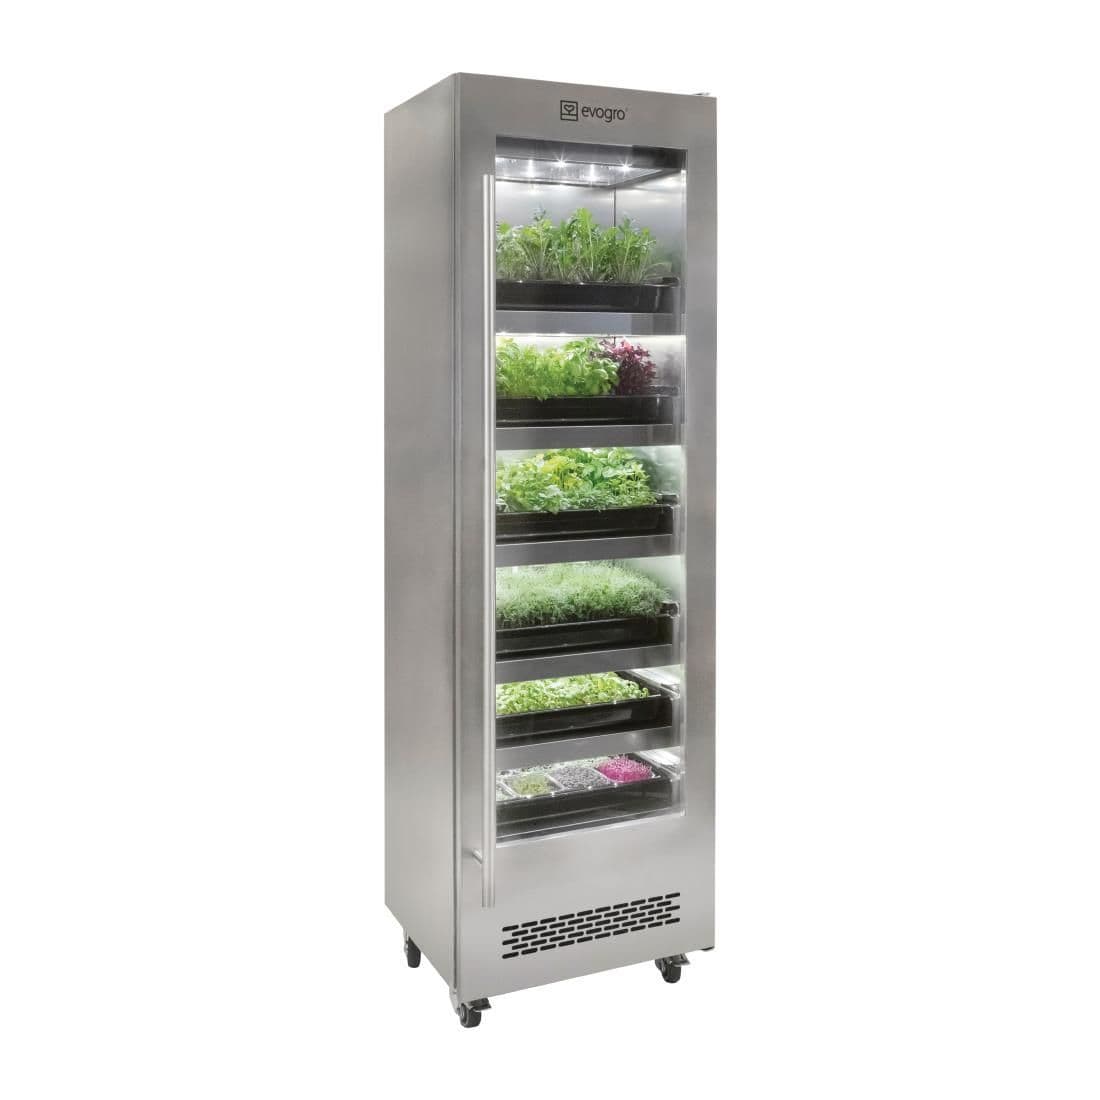 DF965 Evogro Plant Growing System 40132-WS L JD Catering Equipment Solutions Ltd